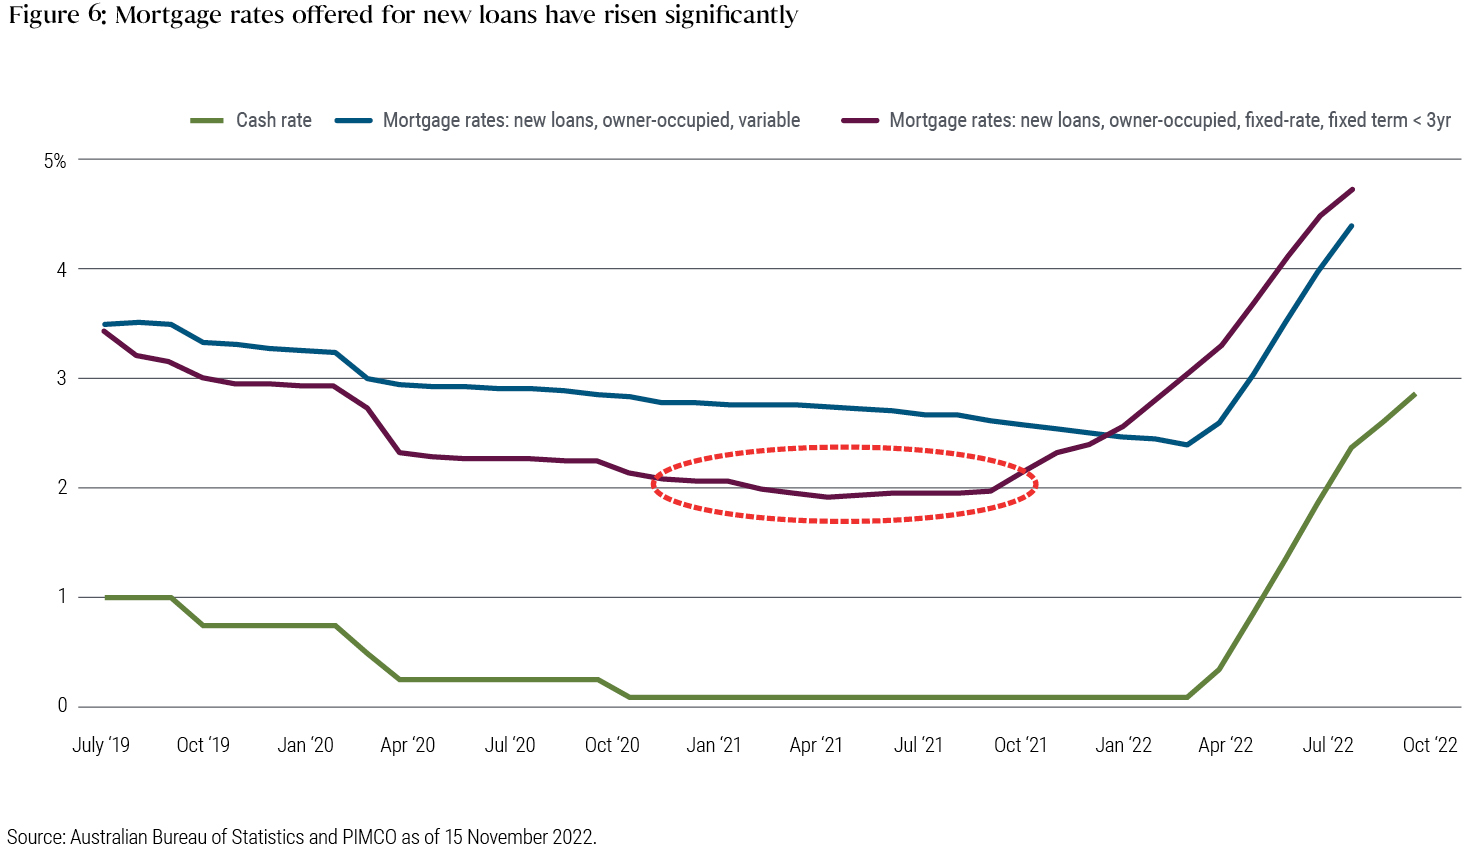 The line chart shows three lines: the Australian cash rate, mortgage rates for new variable loans and mortgage rates for new fixed-rate, fixed term loans that are 3 years or less. It shows that mortgage rates started rising in 2022 as did the cash rate. A fixed rate loan was around 2% in mid-2021 but by September 2022 this had risen to over 4.5%.